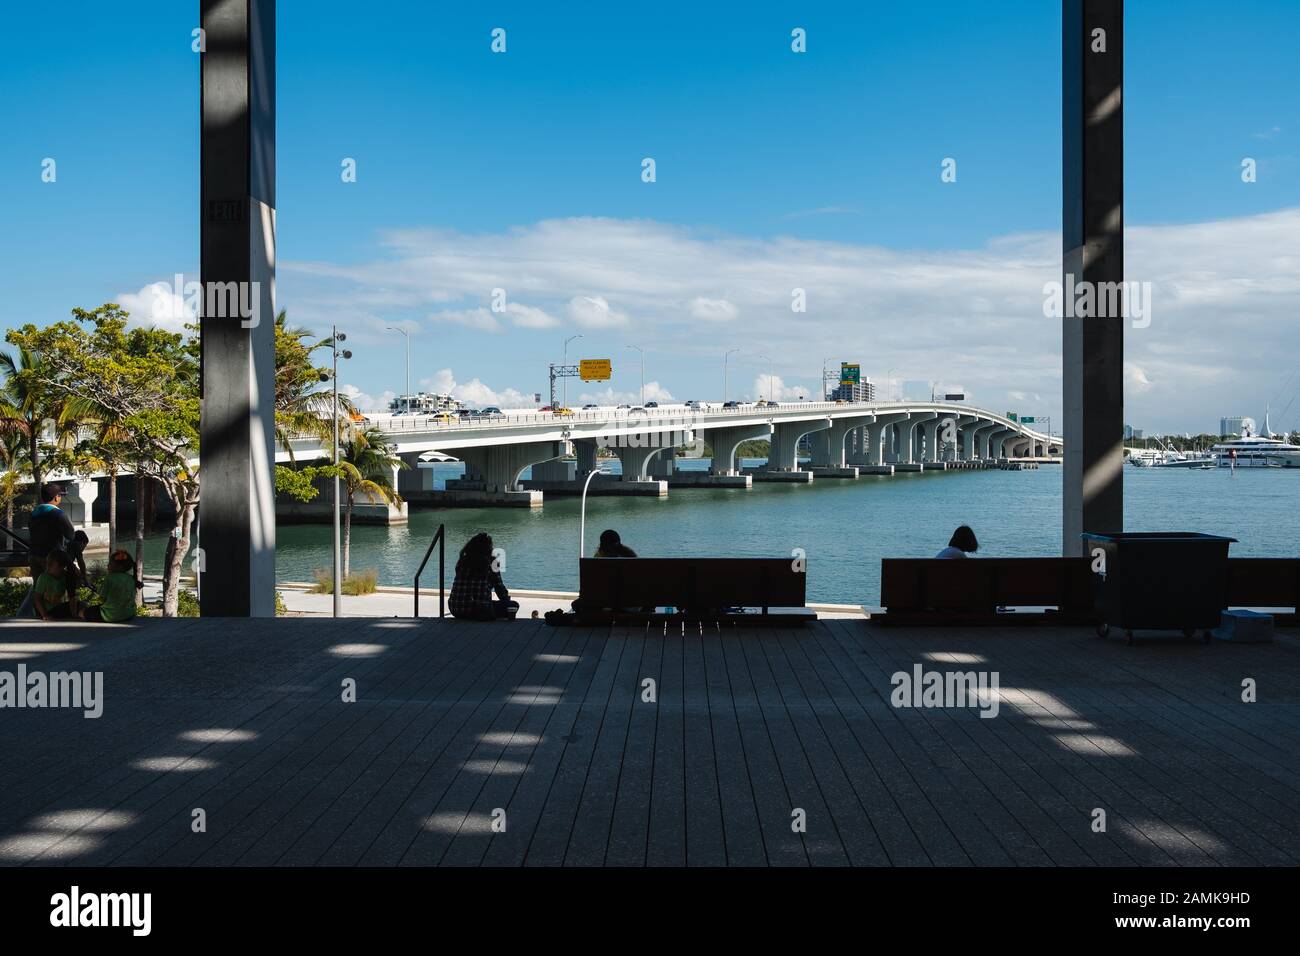 A View of MacArthur Causeway from Perez Art Museum Stock Photo